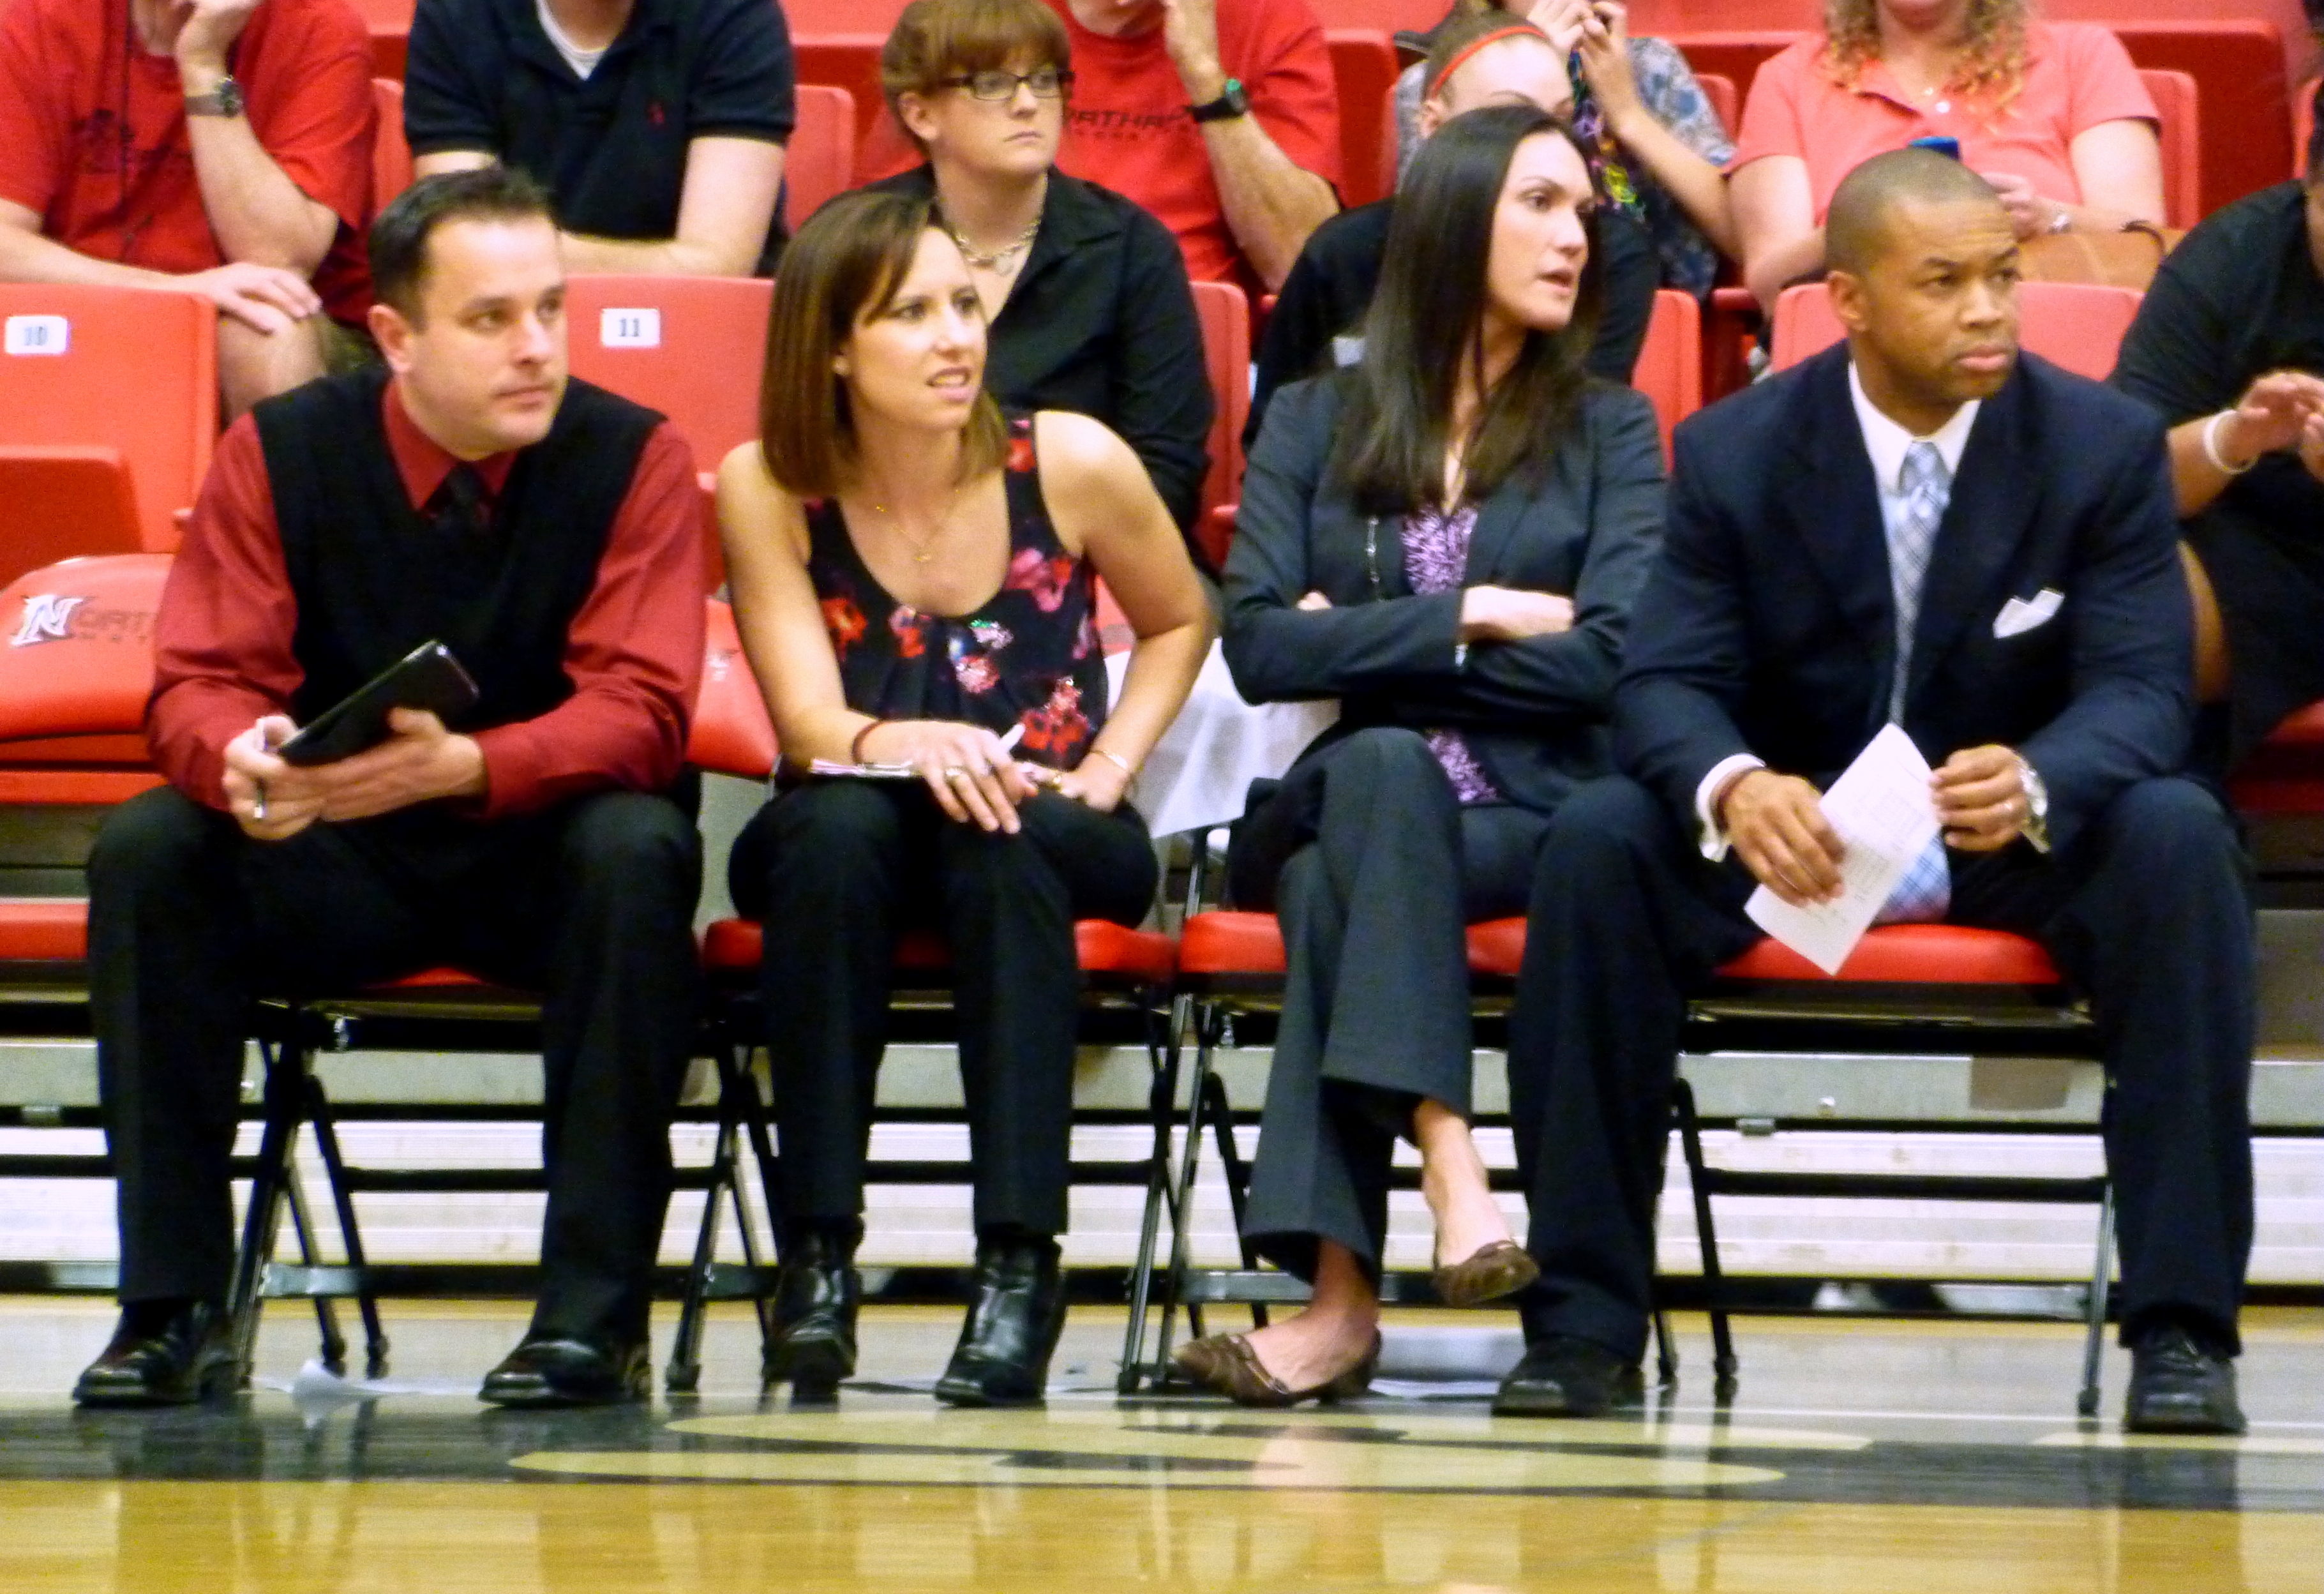 CSUN Coach Jason Flowers, far right, and his assistant coaches watch the last few moments of the game.